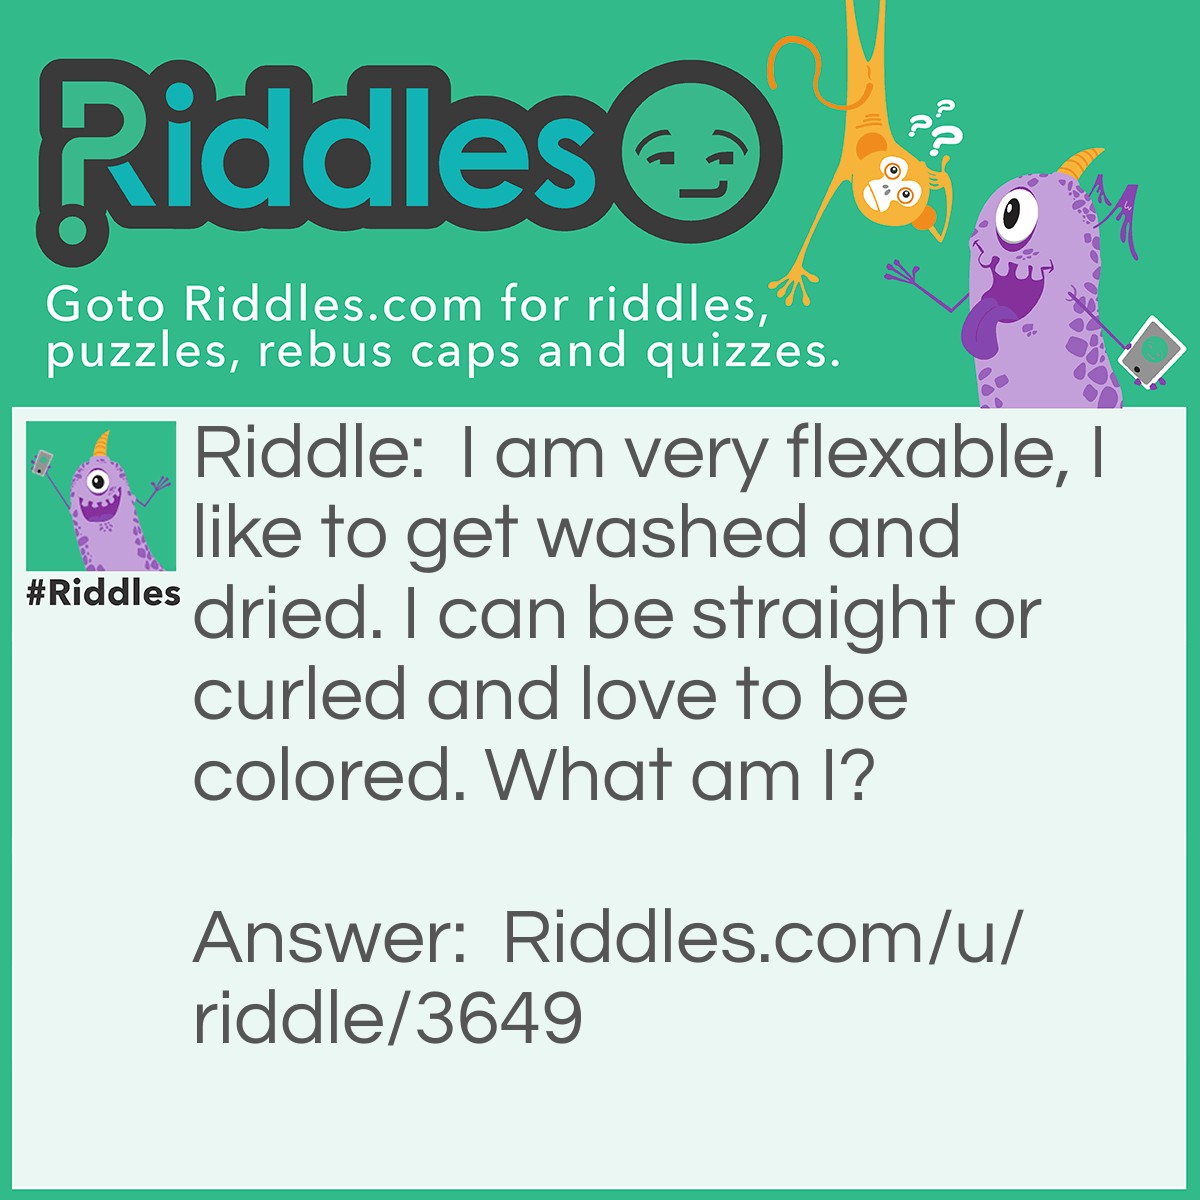 Riddle: I am very flexable, I like to get washed and dried. I can be straight or curled and love to be colored. What am I? Answer: Your Hair.